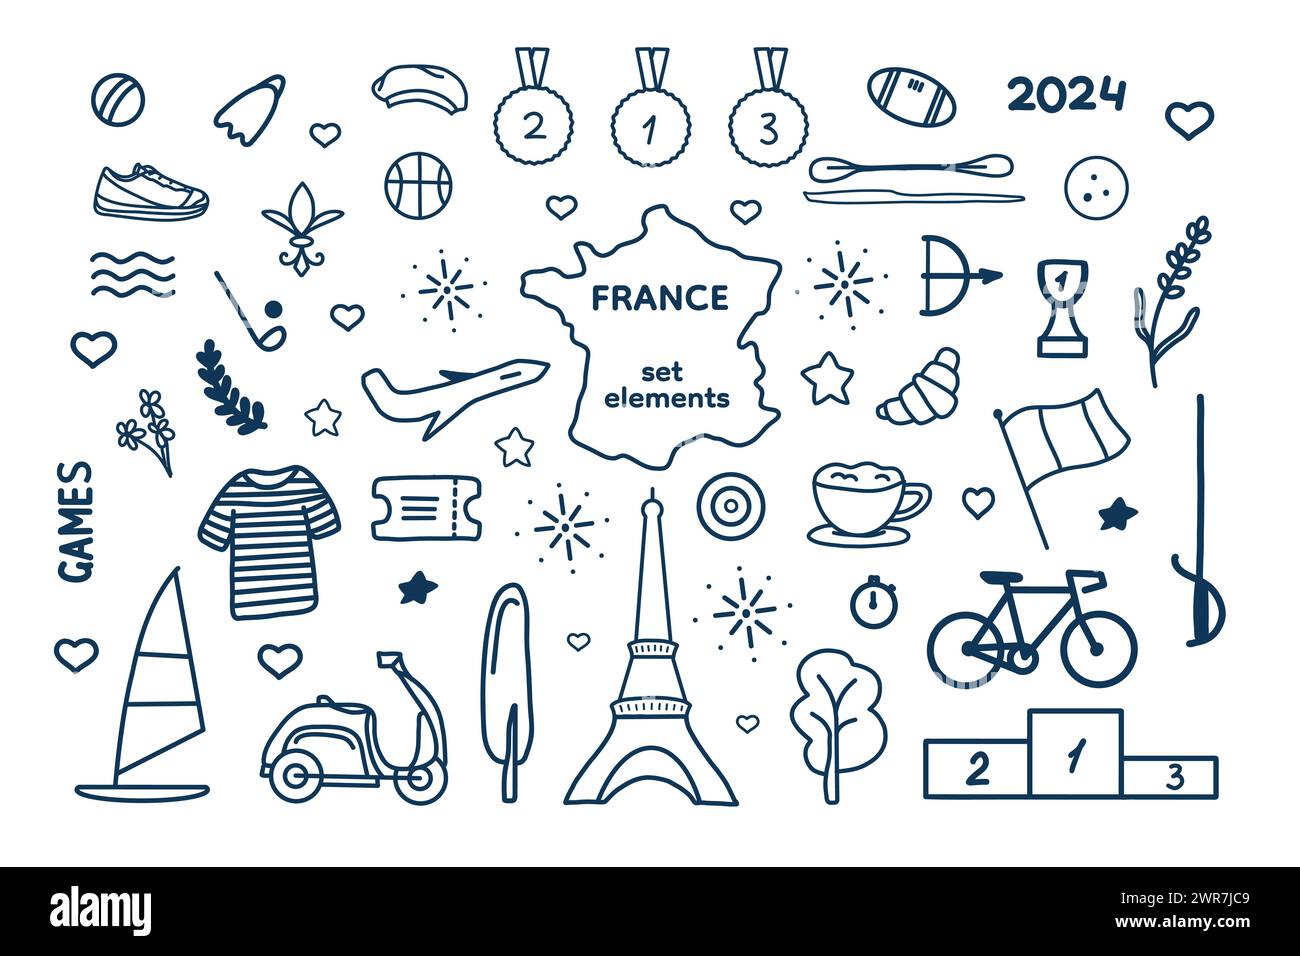 Line sketch of Paris symbols, decorative elements, tourist food and c sports. Vector illustration for cards, background, design, stickers, patterns, s Stock Photo